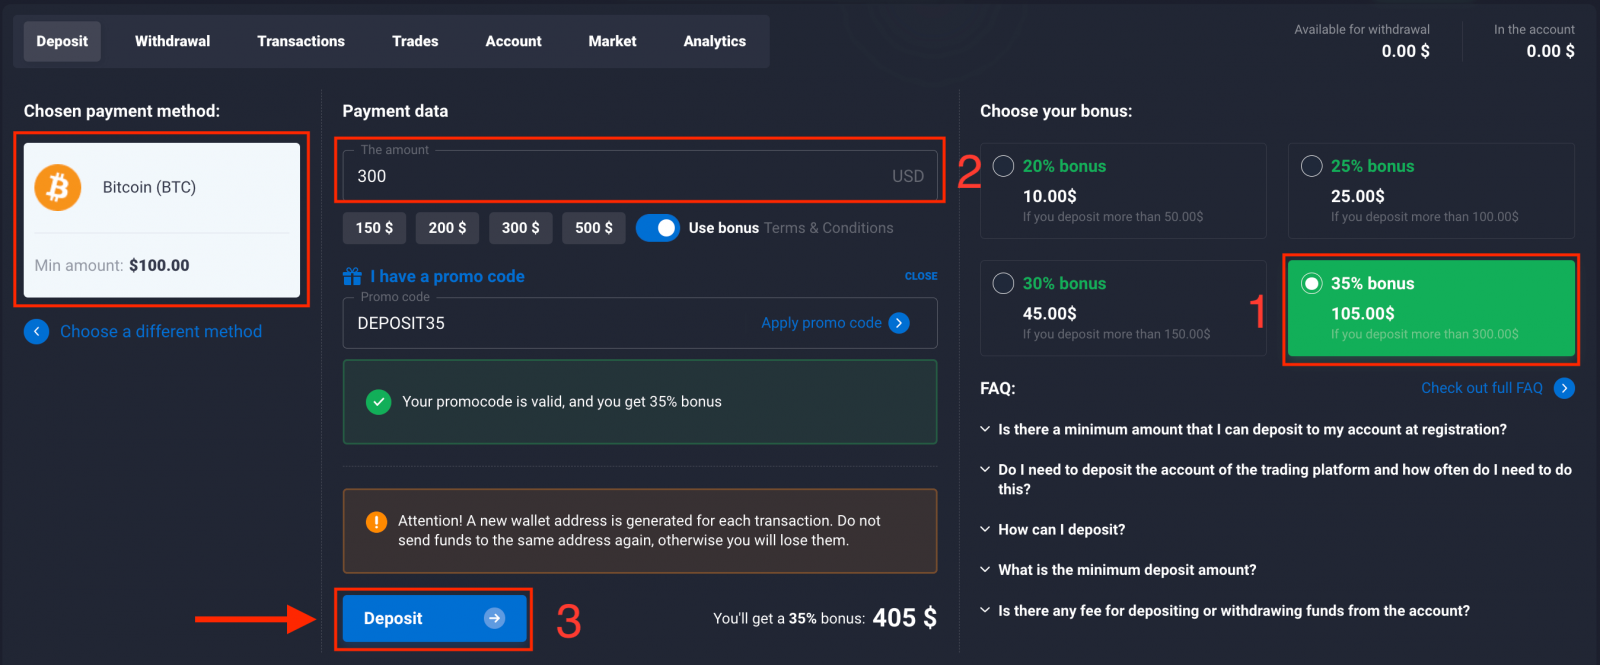 How to Withdraw and Make a Deposit Money in Quotex